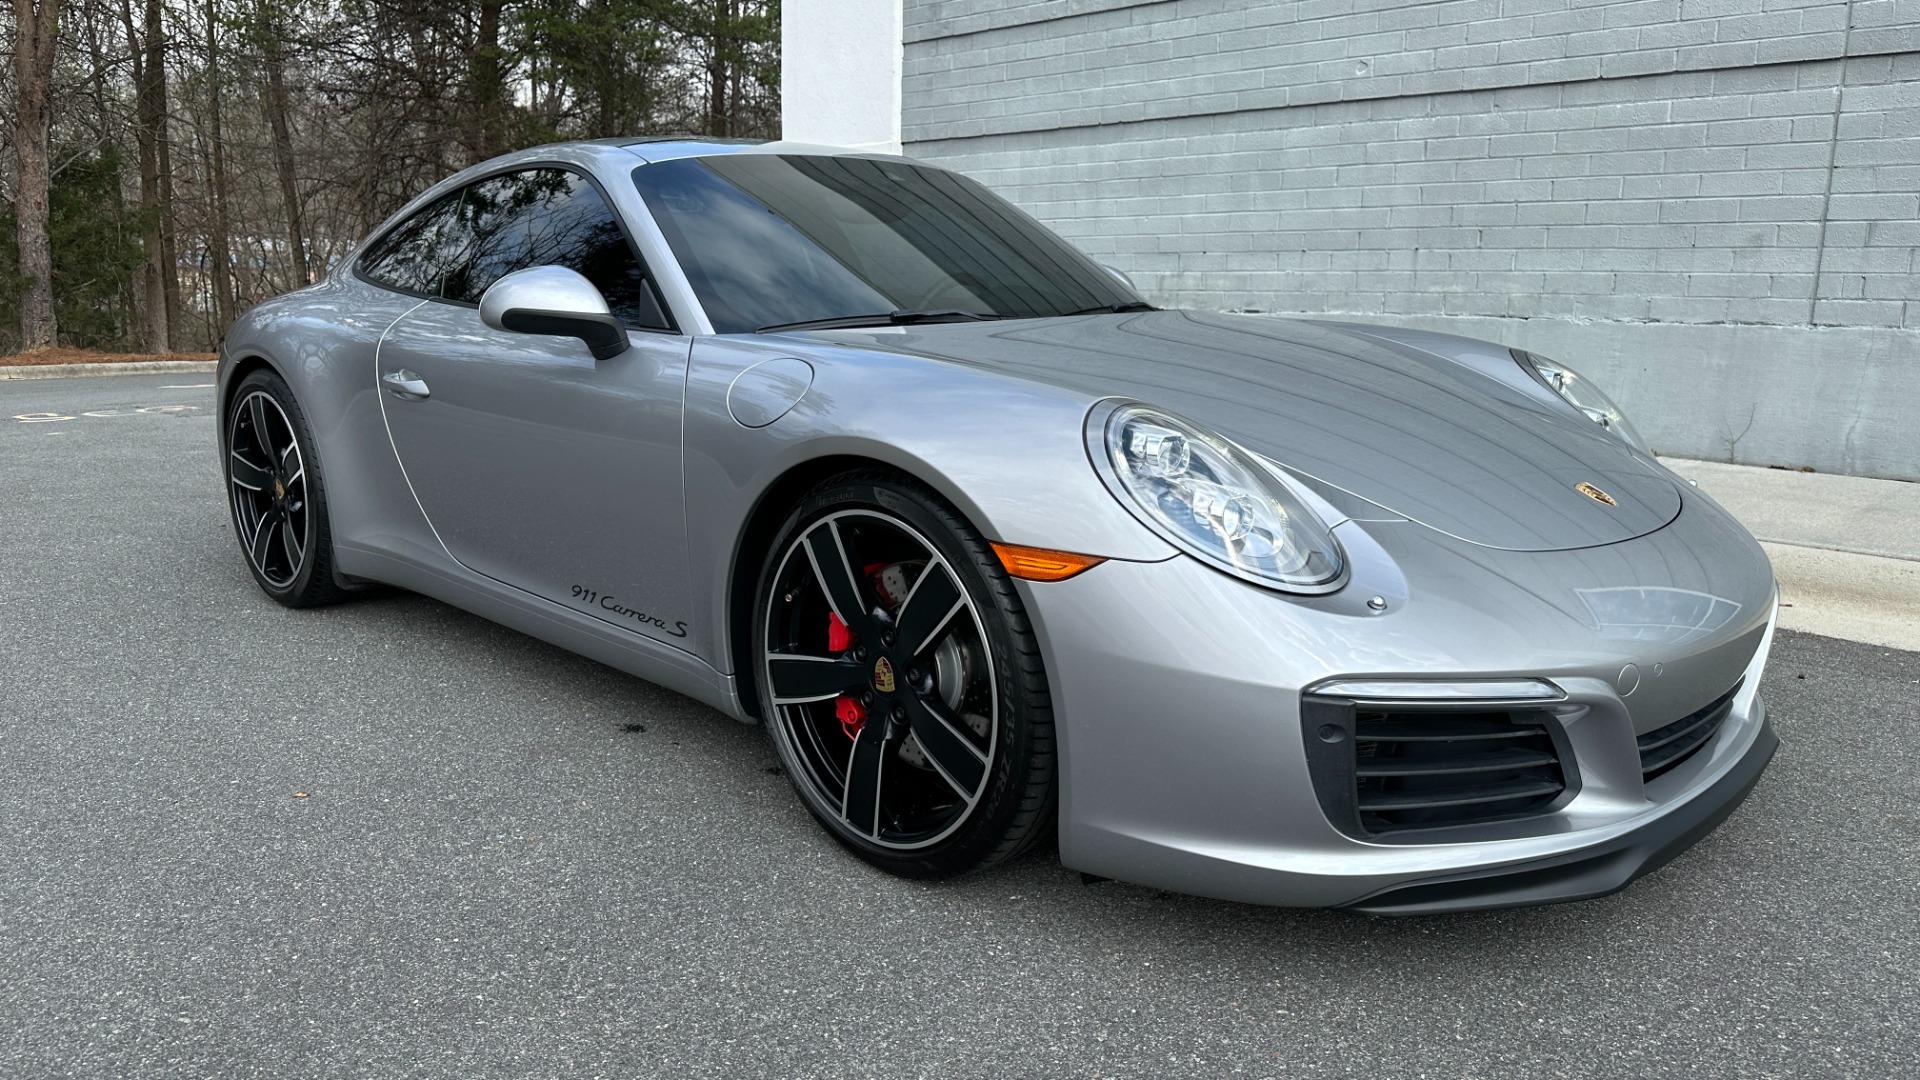 Used 2017 Porsche 911 CARRERA S / PDK / SPORT PLUS INTERIOR / SPORT EXHAUST / PASM SUSPENSION for sale Sold at Formula Imports in Charlotte NC 28227 2